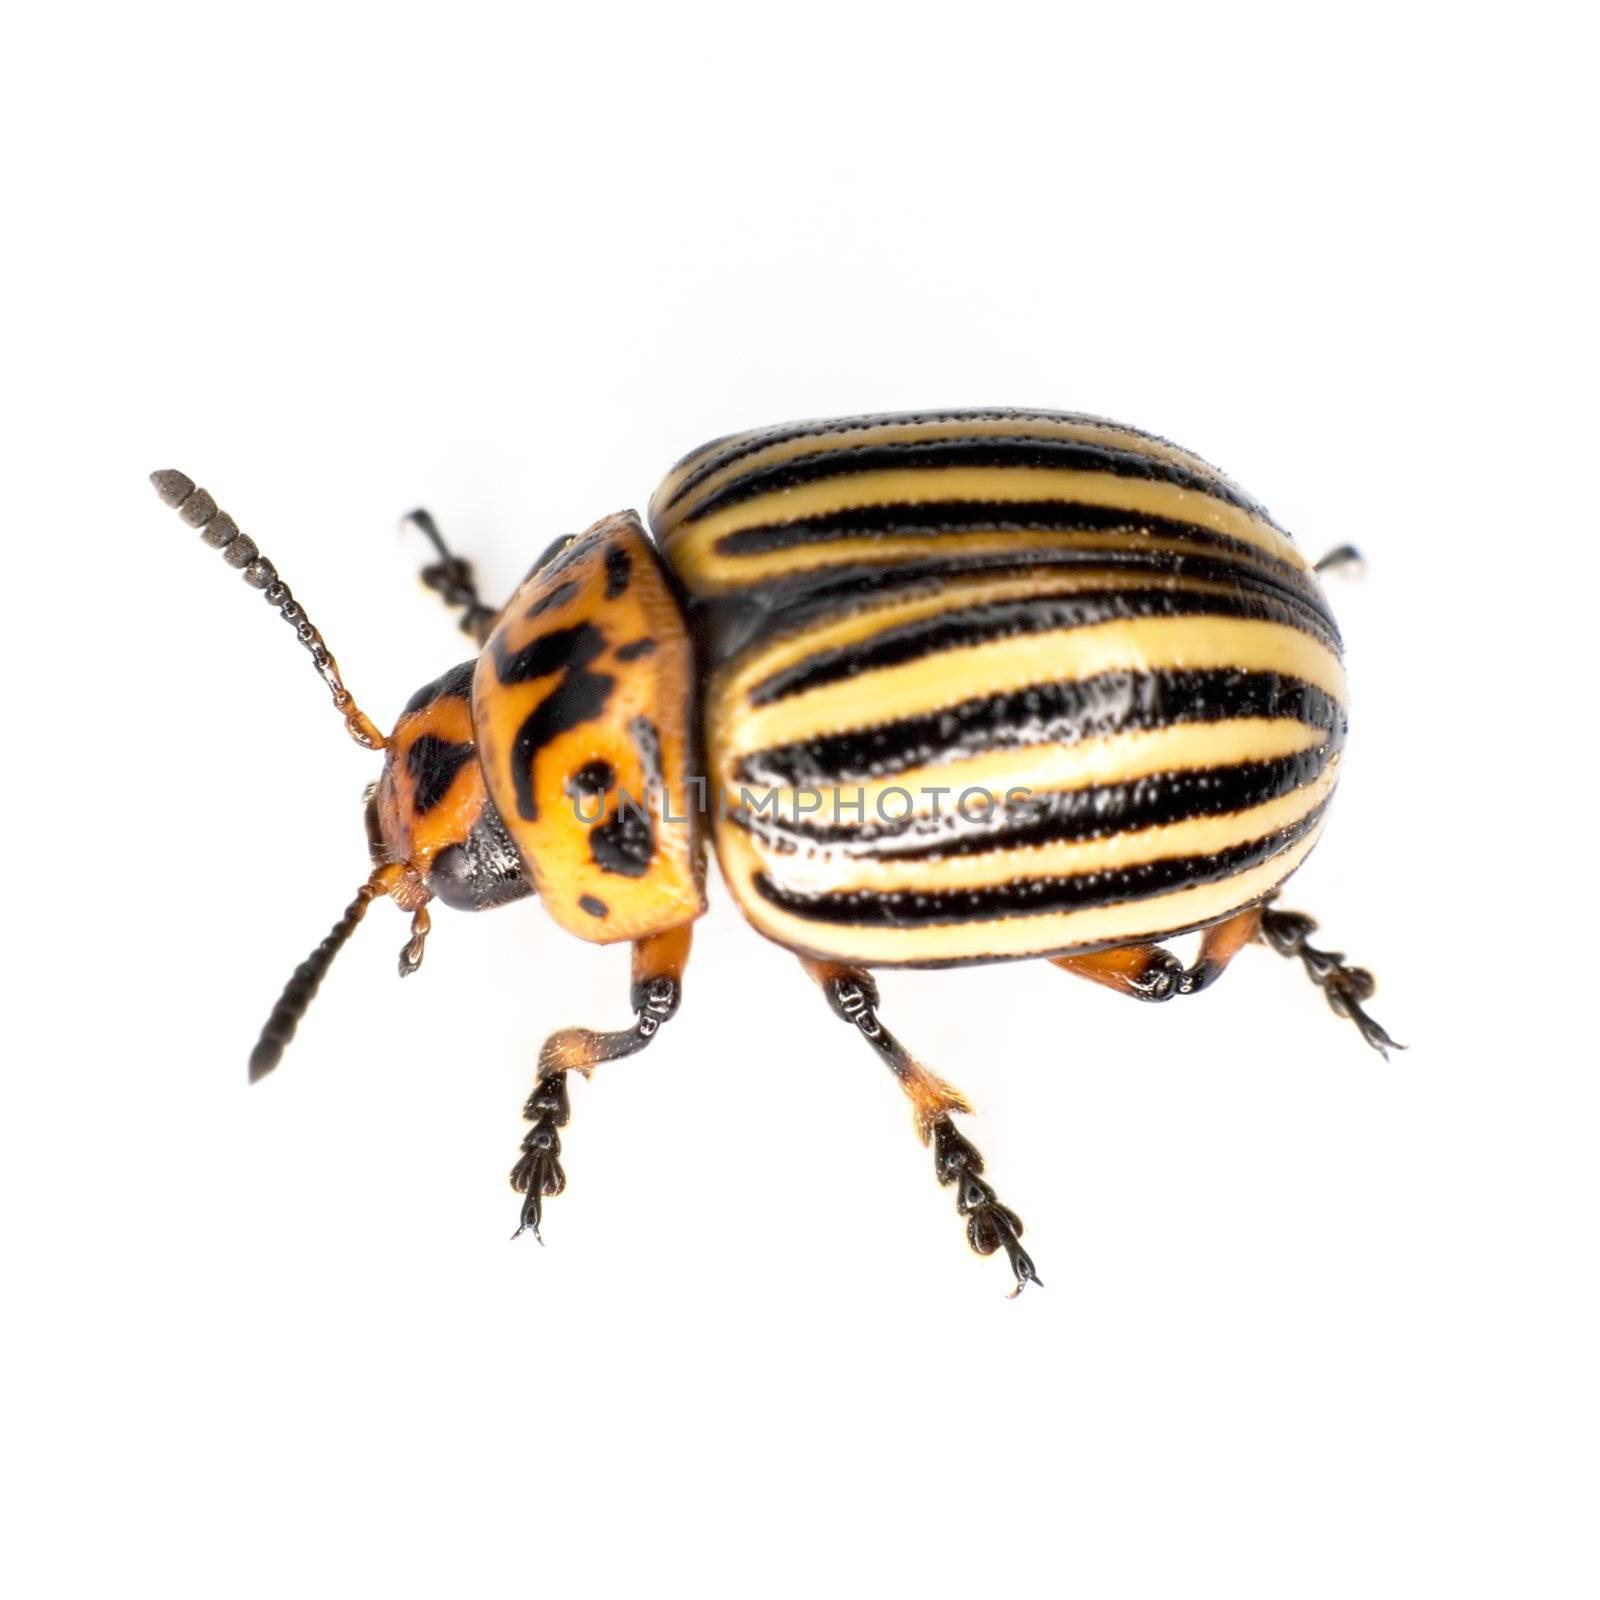 Colorado beetle photographed on a white background